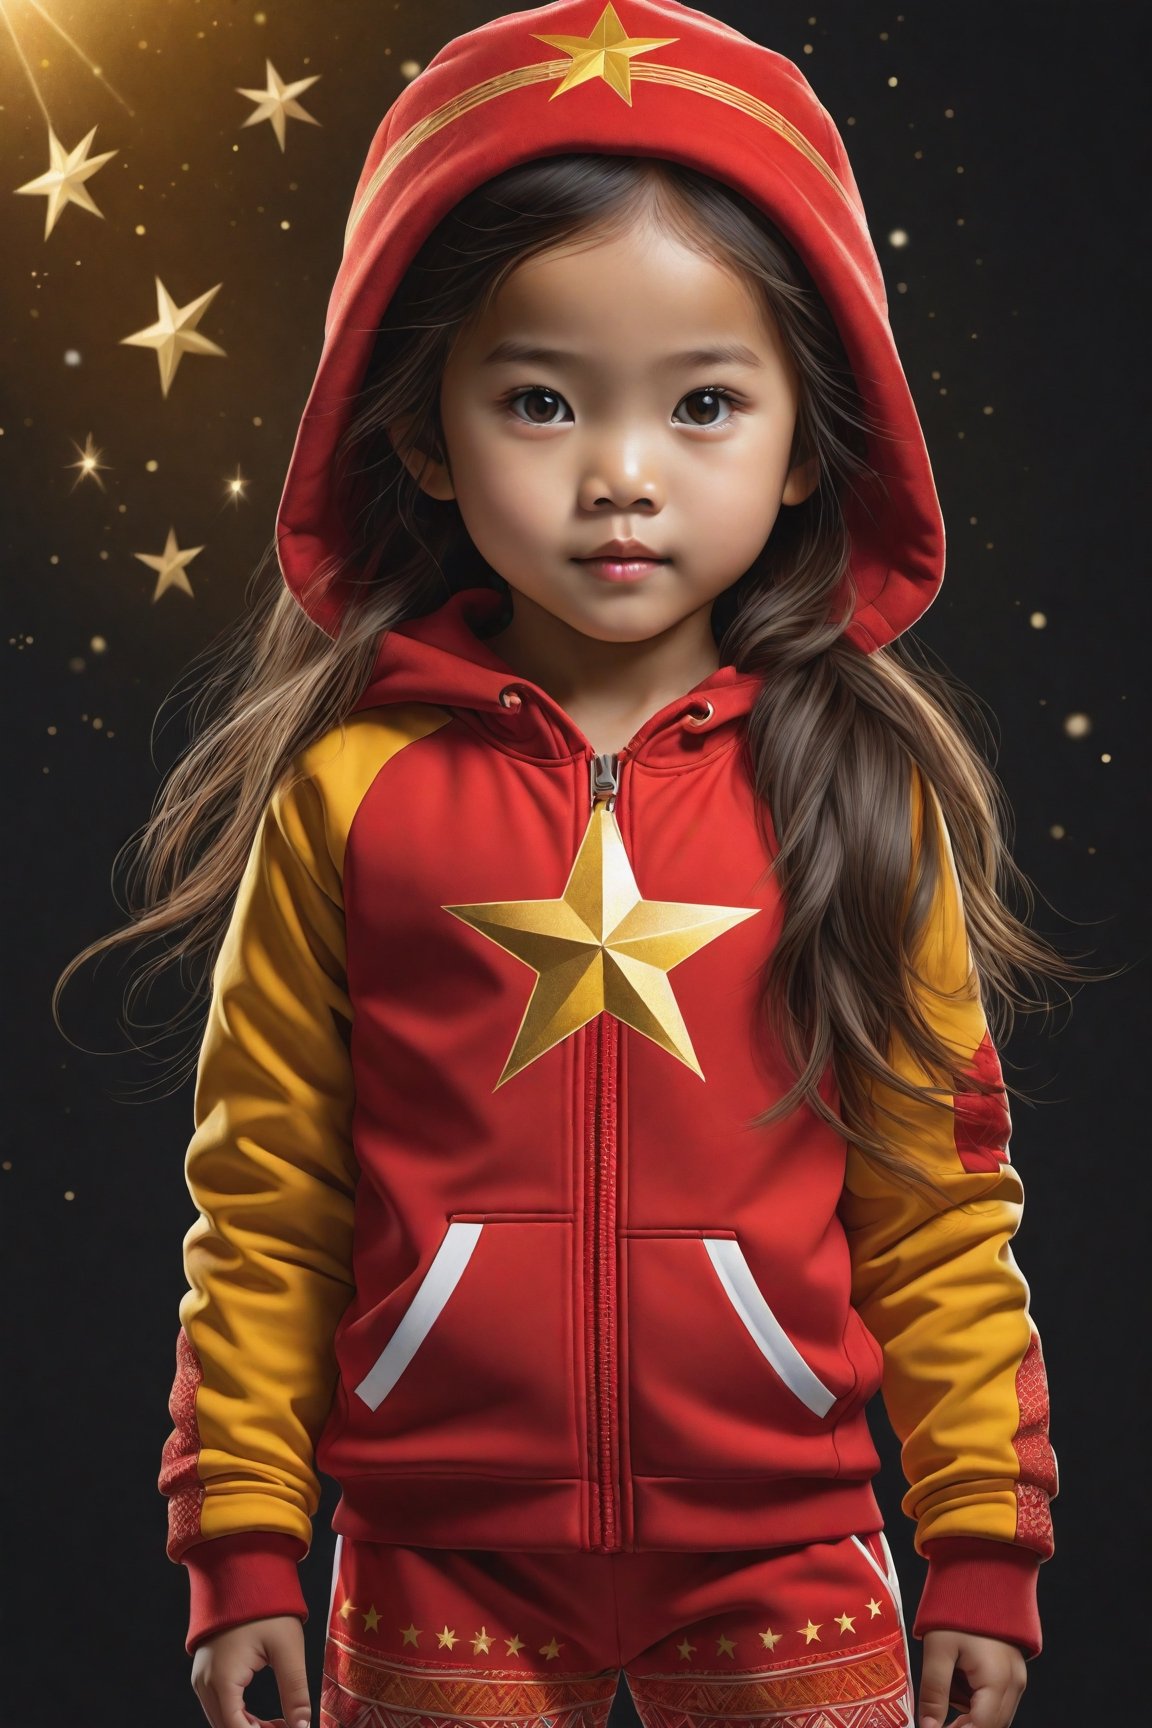 ((full body)) body_marking, highly detailed shot tribal version character of cute Vietnamese girl kid in Red mix Yellow winter sport outfit has a big golden star, masterpiece artwork, white accent, detailed face features, subtle gradients, extremely detailed, photorealistic, 8k, centered, perfect symmetrical, studio photography, muted color scheme, made with adobe illustrator, solid dark background 